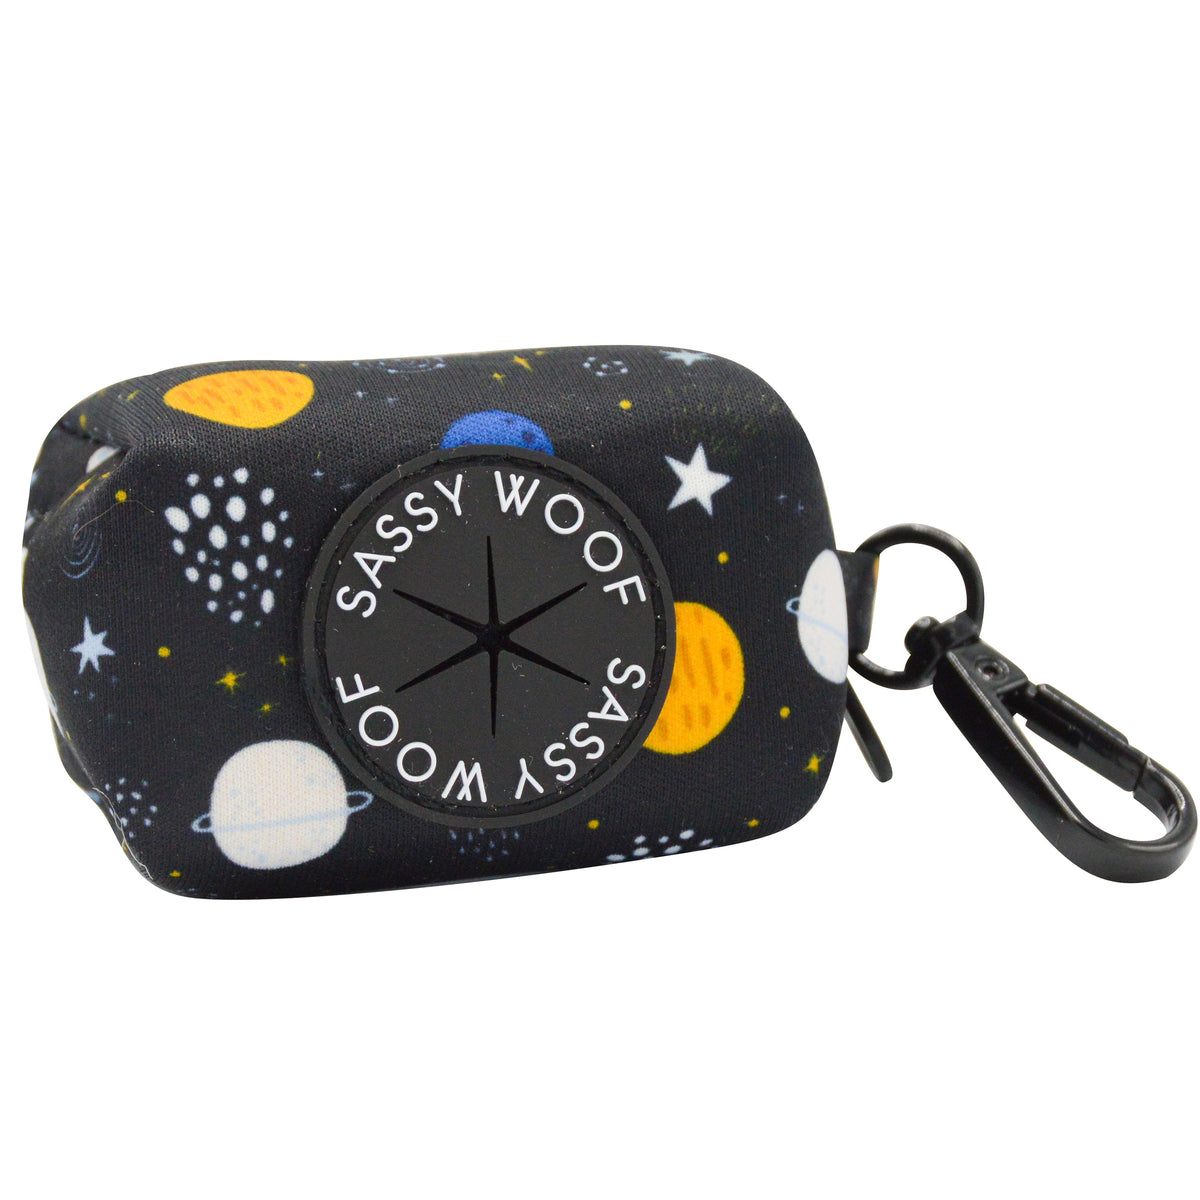 Dog Waste Bag Holder - To The Stars and Beyond